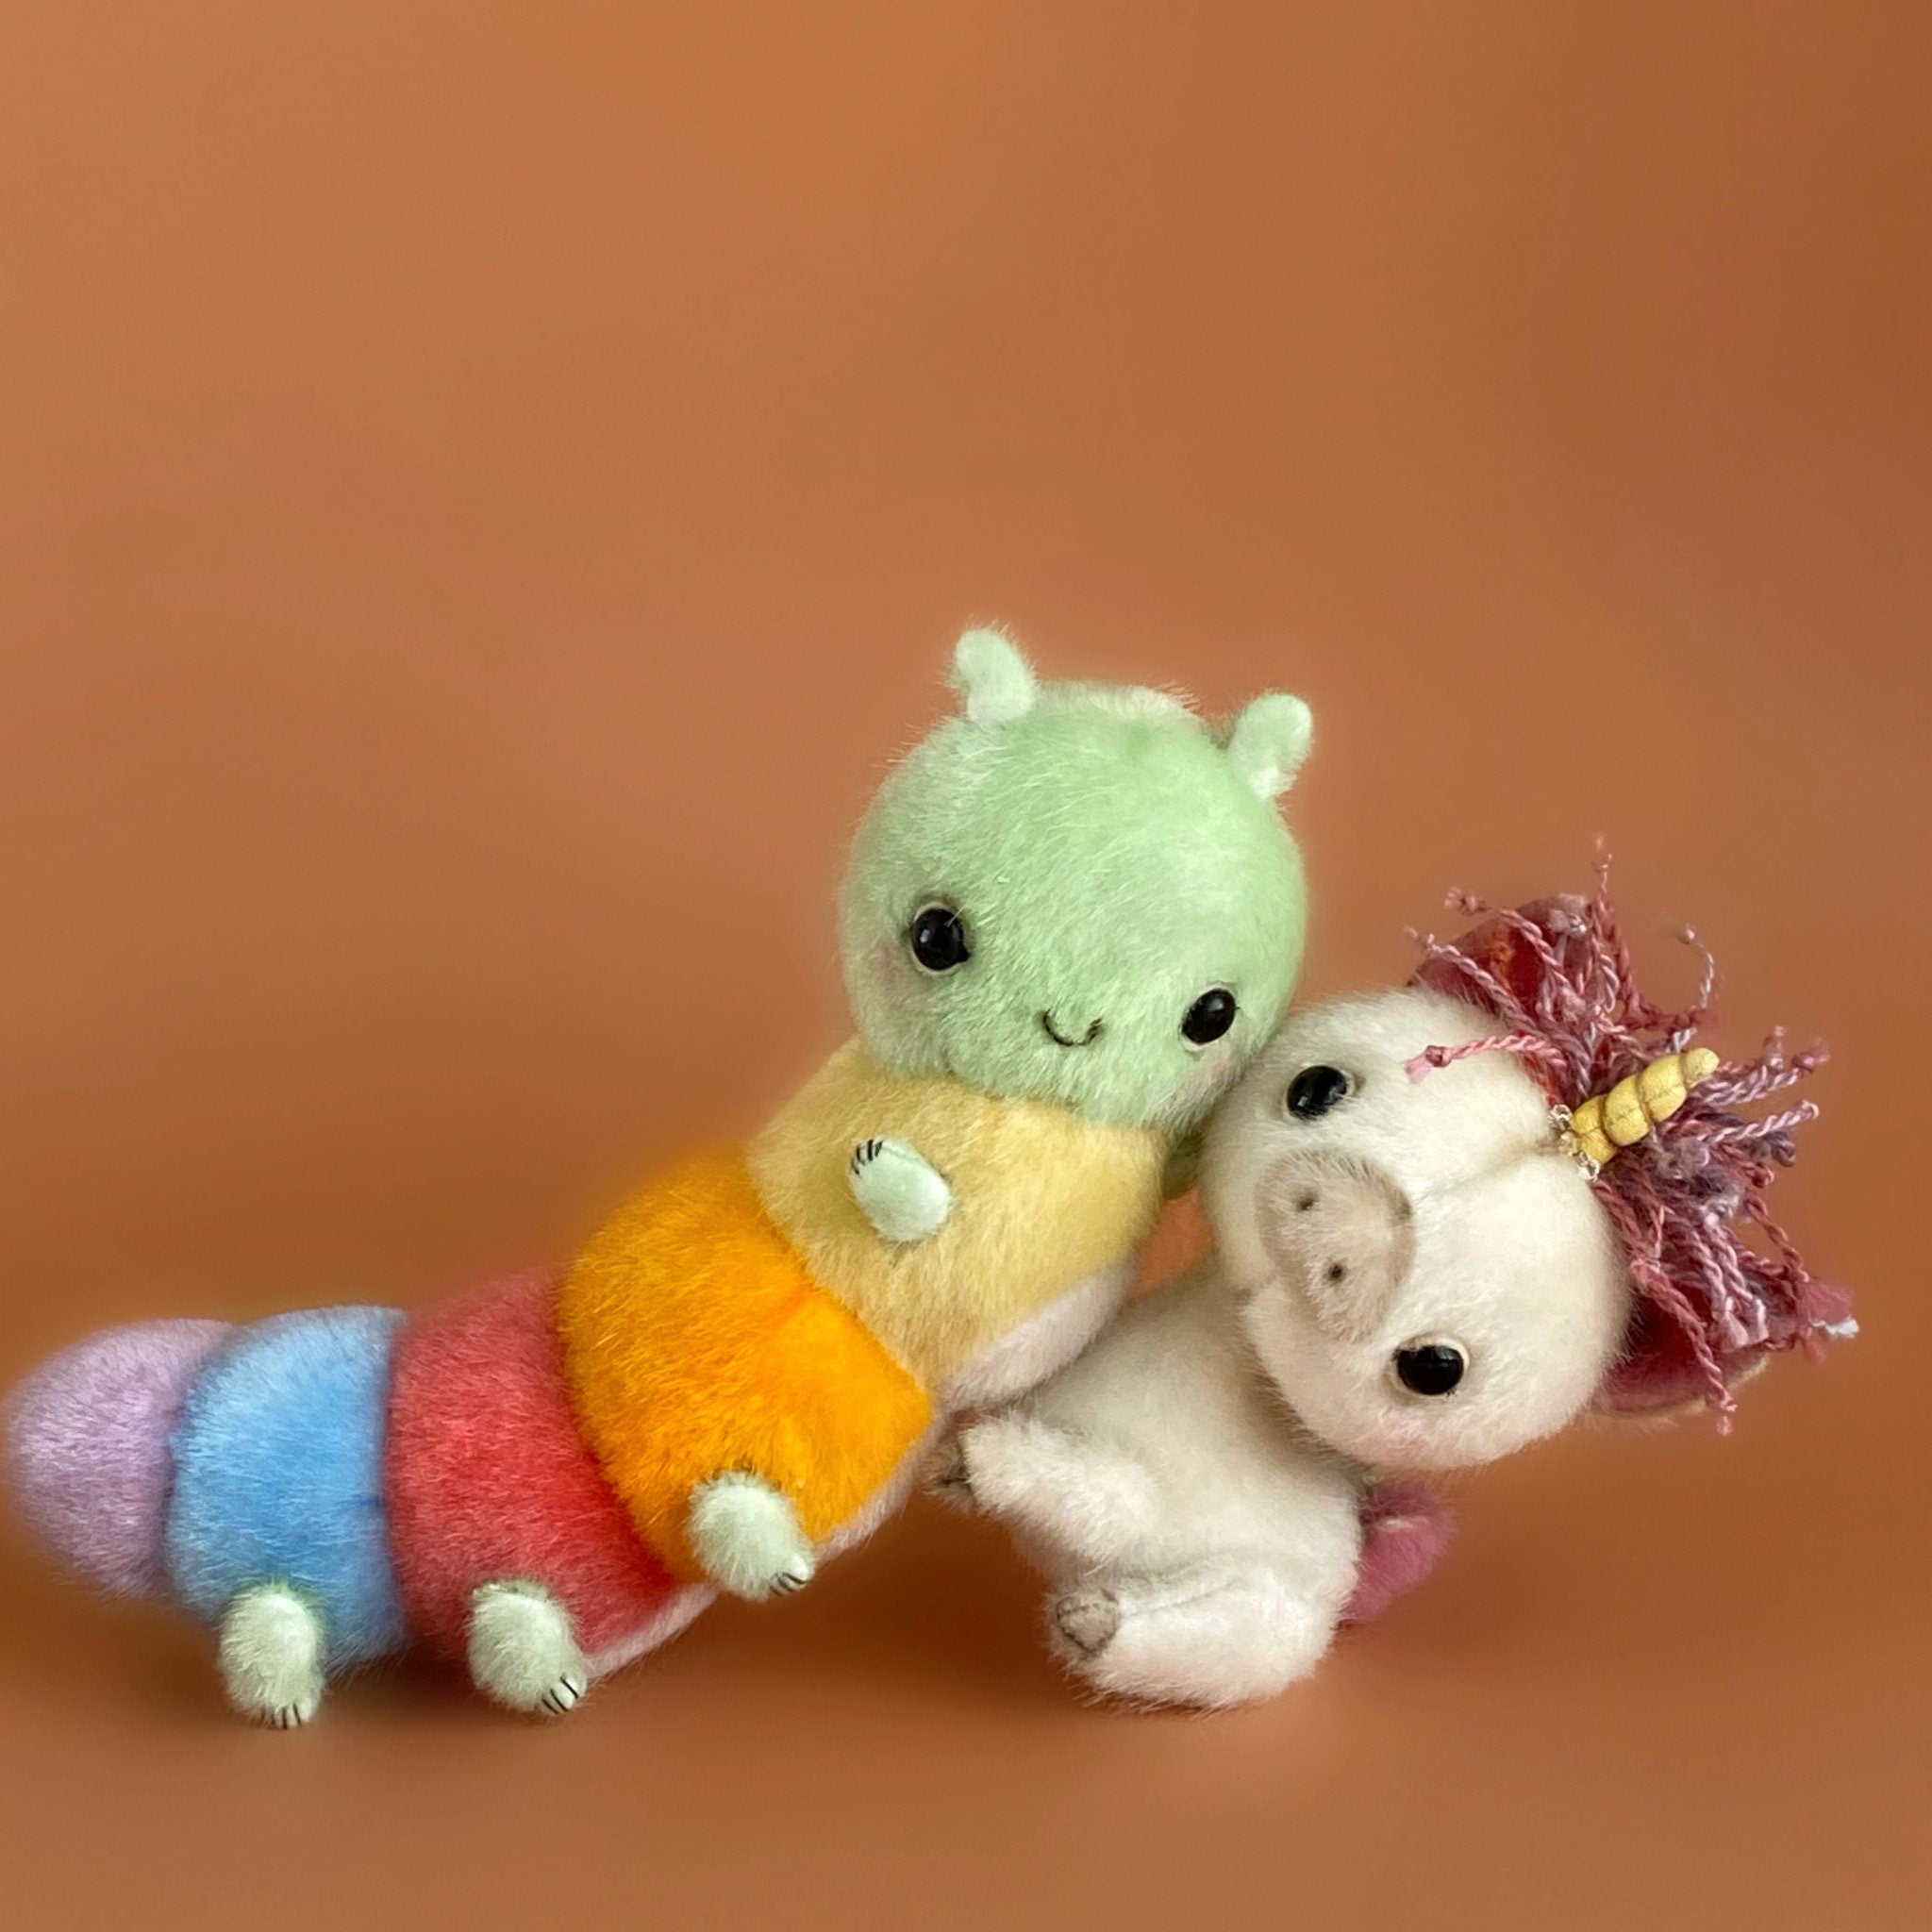 Caterpillar PDF sewing pattern Video tutorial DIY stuffed toy pattern kids toy pattern easy to sew gift for creative friend